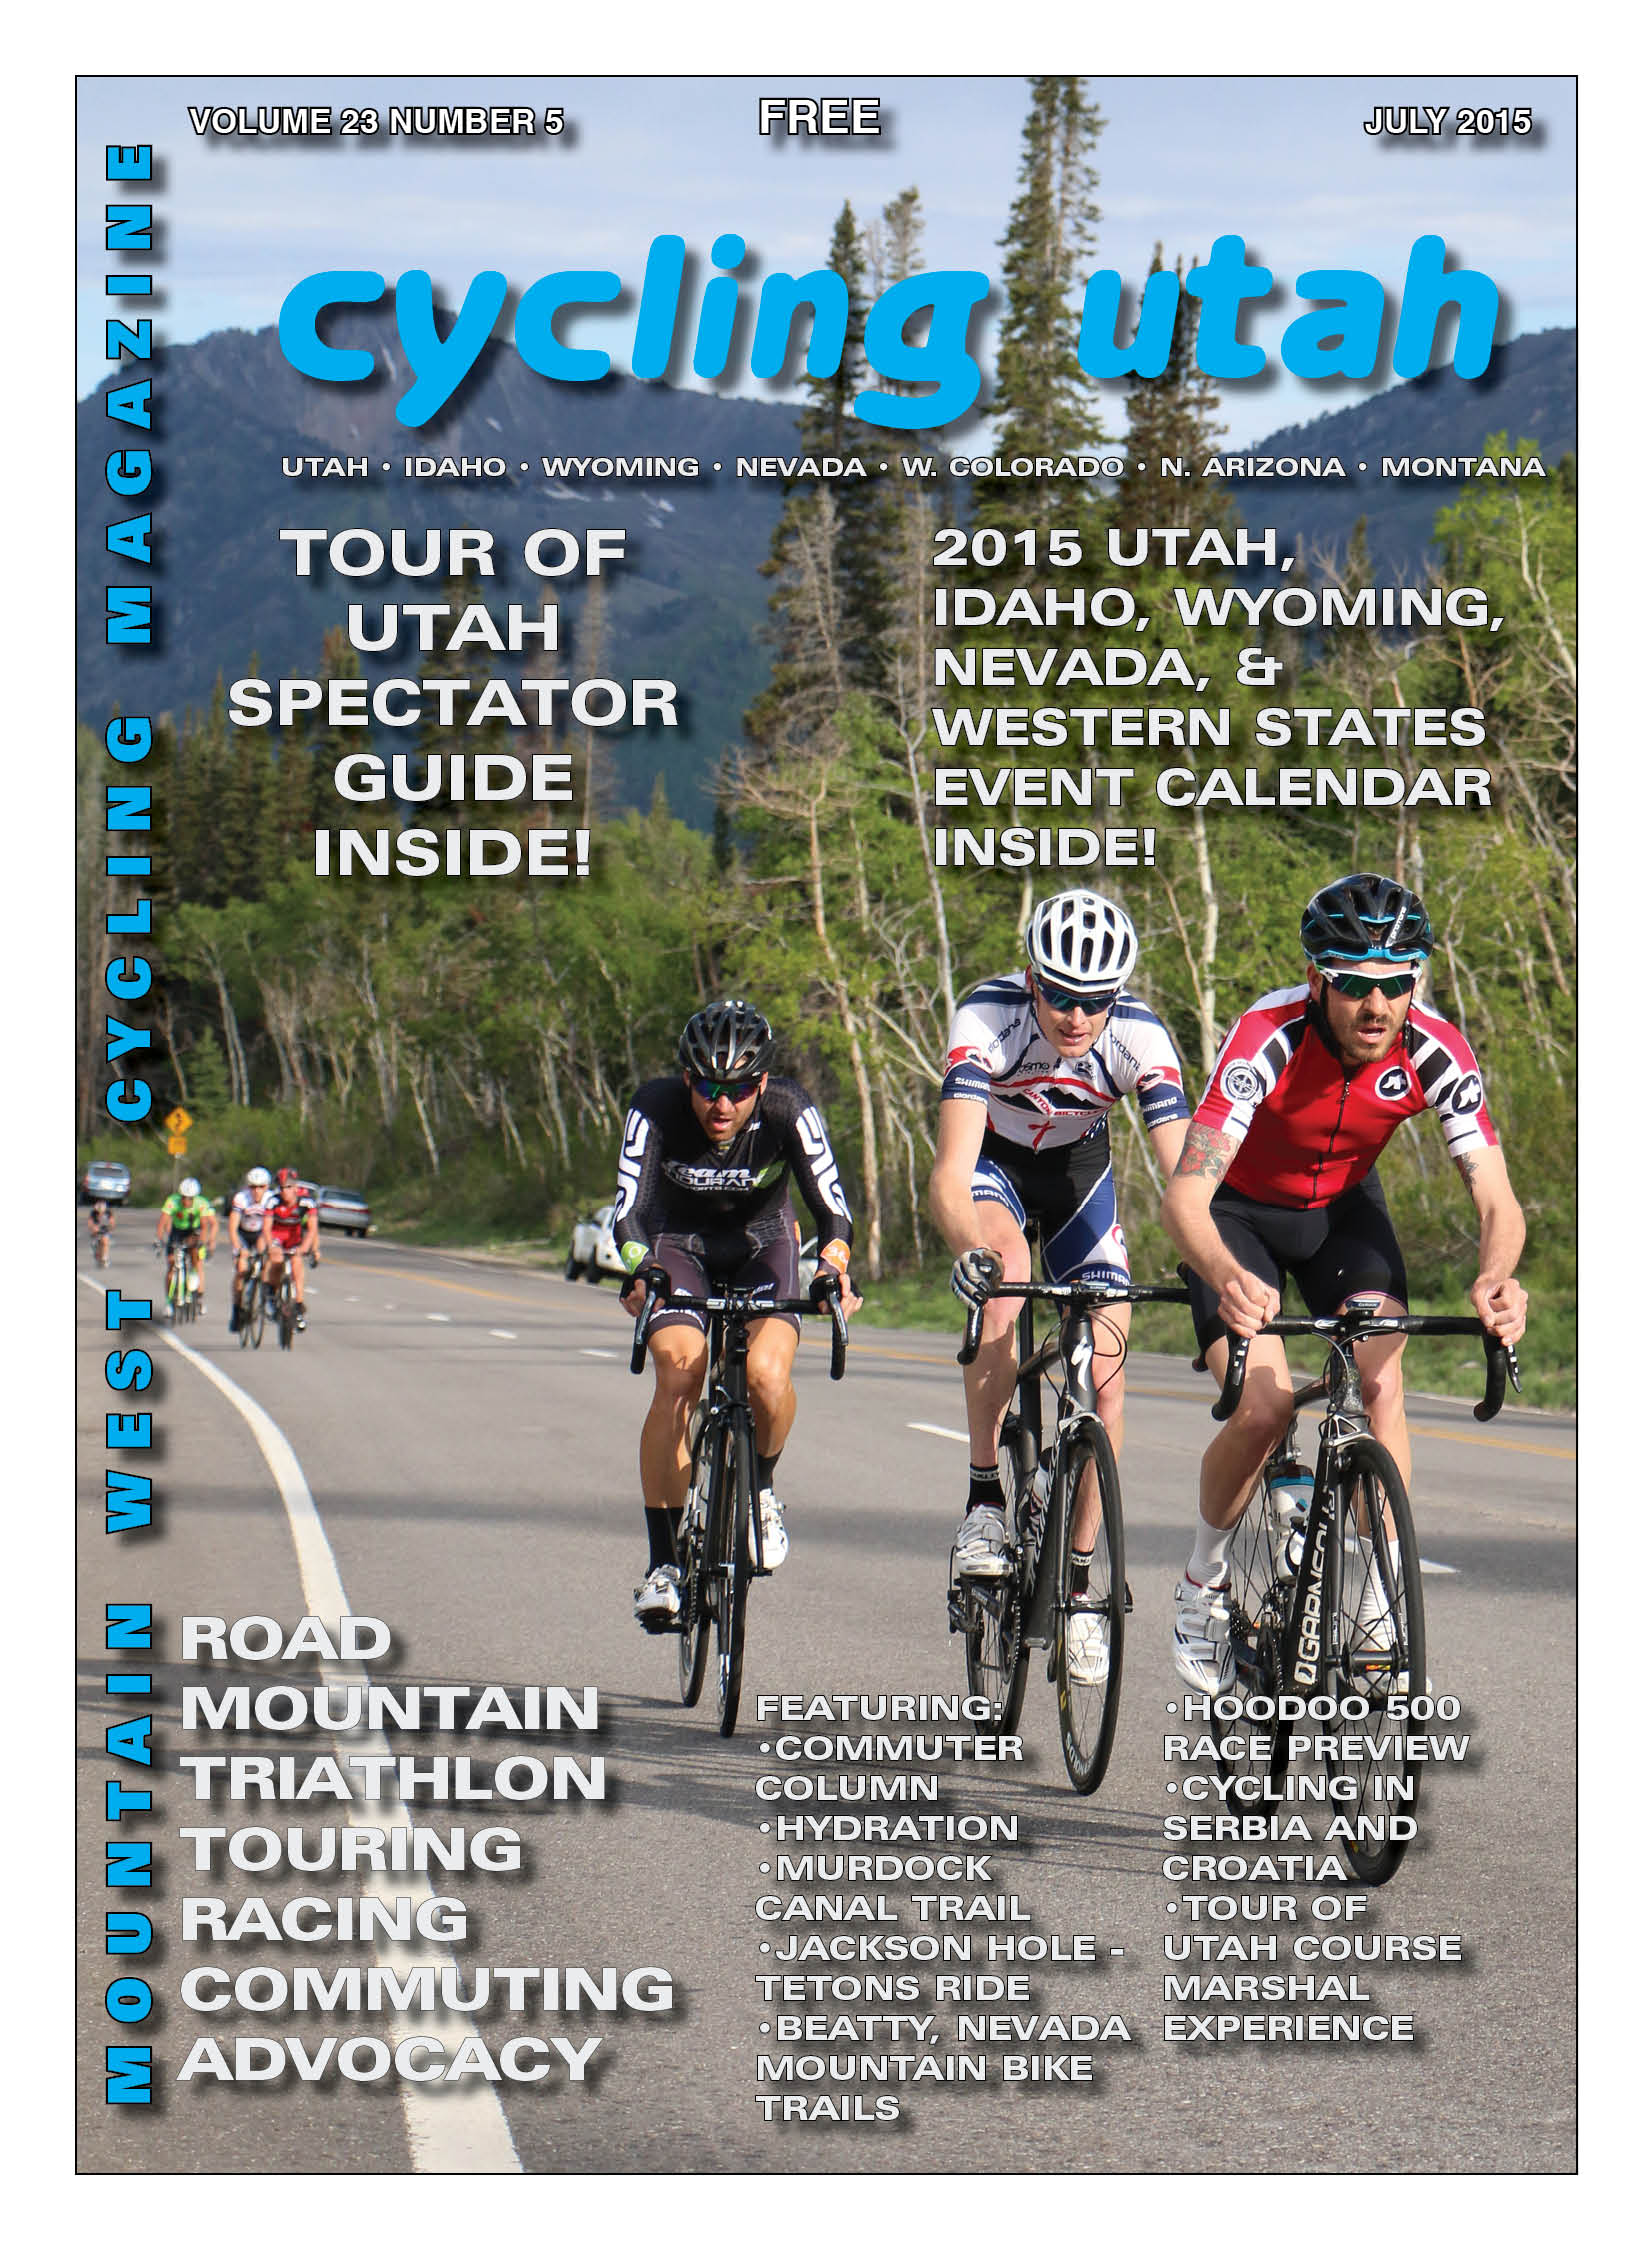 Cycling Utah’s July 2015 Issue is Now Available!